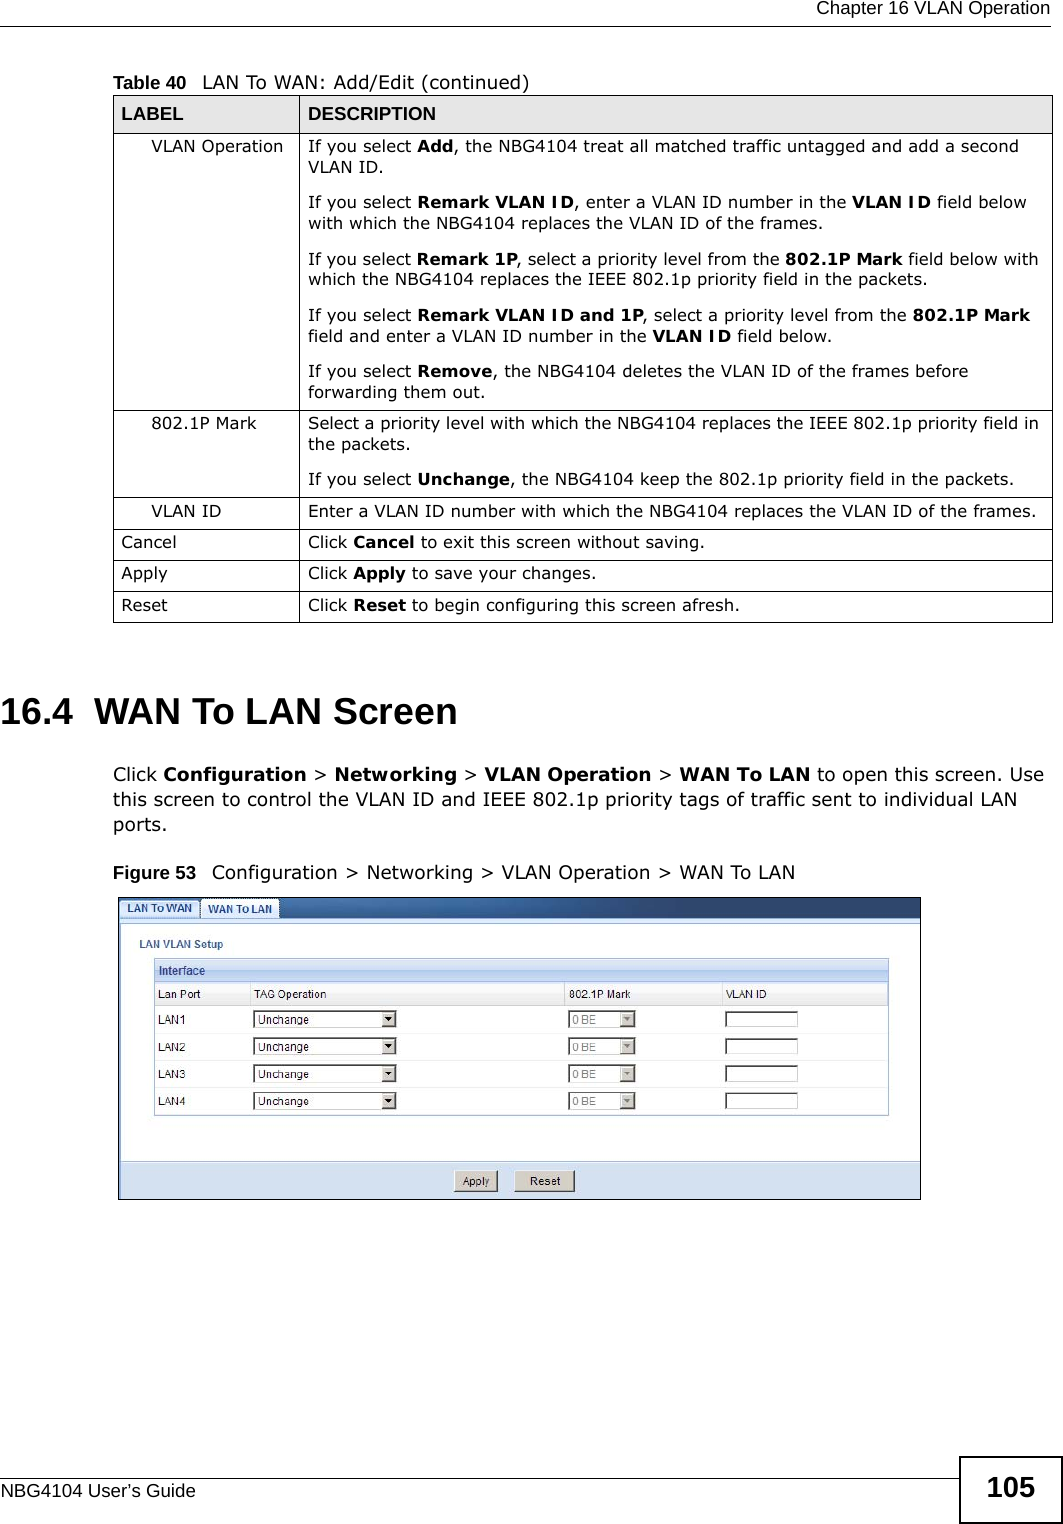  Chapter 16 VLAN OperationNBG4104 User’s Guide 10516.4  WAN To LAN ScreenClick Configuration &gt; Networking &gt; VLAN Operation &gt; WAN To LAN to open this screen. Use this screen to control the VLAN ID and IEEE 802.1p priority tags of traffic sent to individual LAN ports.Figure 53   Configuration &gt; Networking &gt; VLAN Operation &gt; WAN To LANVLAN Operation If you select Add, the NBG4104 treat all matched traffic untagged and add a second VLAN ID.If you select Remark VLAN ID, enter a VLAN ID number in the VLAN ID field below with which the NBG4104 replaces the VLAN ID of the frames.If you select Remark 1P, select a priority level from the 802.1P Mark field below with which the NBG4104 replaces the IEEE 802.1p priority field in the packets.If you select Remark VLAN ID and 1P, select a priority level from the 802.1P Mark field and enter a VLAN ID number in the VLAN ID field below.If you select Remove, the NBG4104 deletes the VLAN ID of the frames before forwarding them out.802.1P Mark Select a priority level with which the NBG4104 replaces the IEEE 802.1p priority field in the packets.If you select Unchange, the NBG4104 keep the 802.1p priority field in the packets.VLAN ID Enter a VLAN ID number with which the NBG4104 replaces the VLAN ID of the frames.Cancel Click Cancel to exit this screen without saving.Apply Click Apply to save your changes.Reset Click Reset to begin configuring this screen afresh.Table 40   LAN To WAN: Add/Edit (continued)LABEL DESCRIPTION